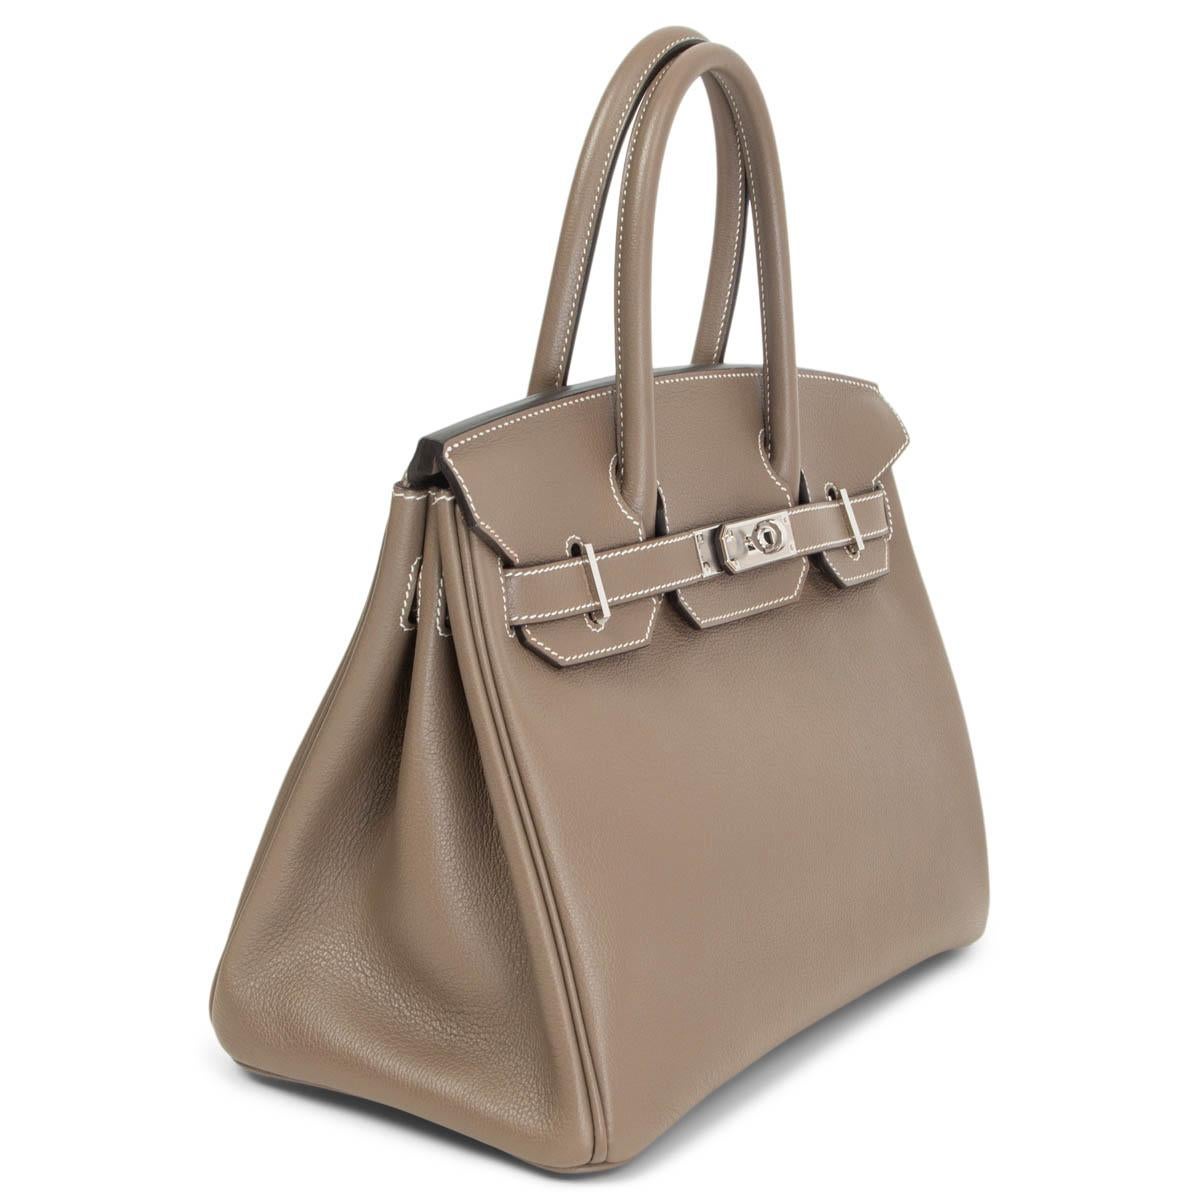 100% authentic Hermès Birkin 30 bag in Etoupe (taupe) Taurillon Novillo leather with contrasting white stitching and Palladium hardware. Lined in Chevre (goat skin) with an open pocket against the front and a zipper pocket against the back. Has been